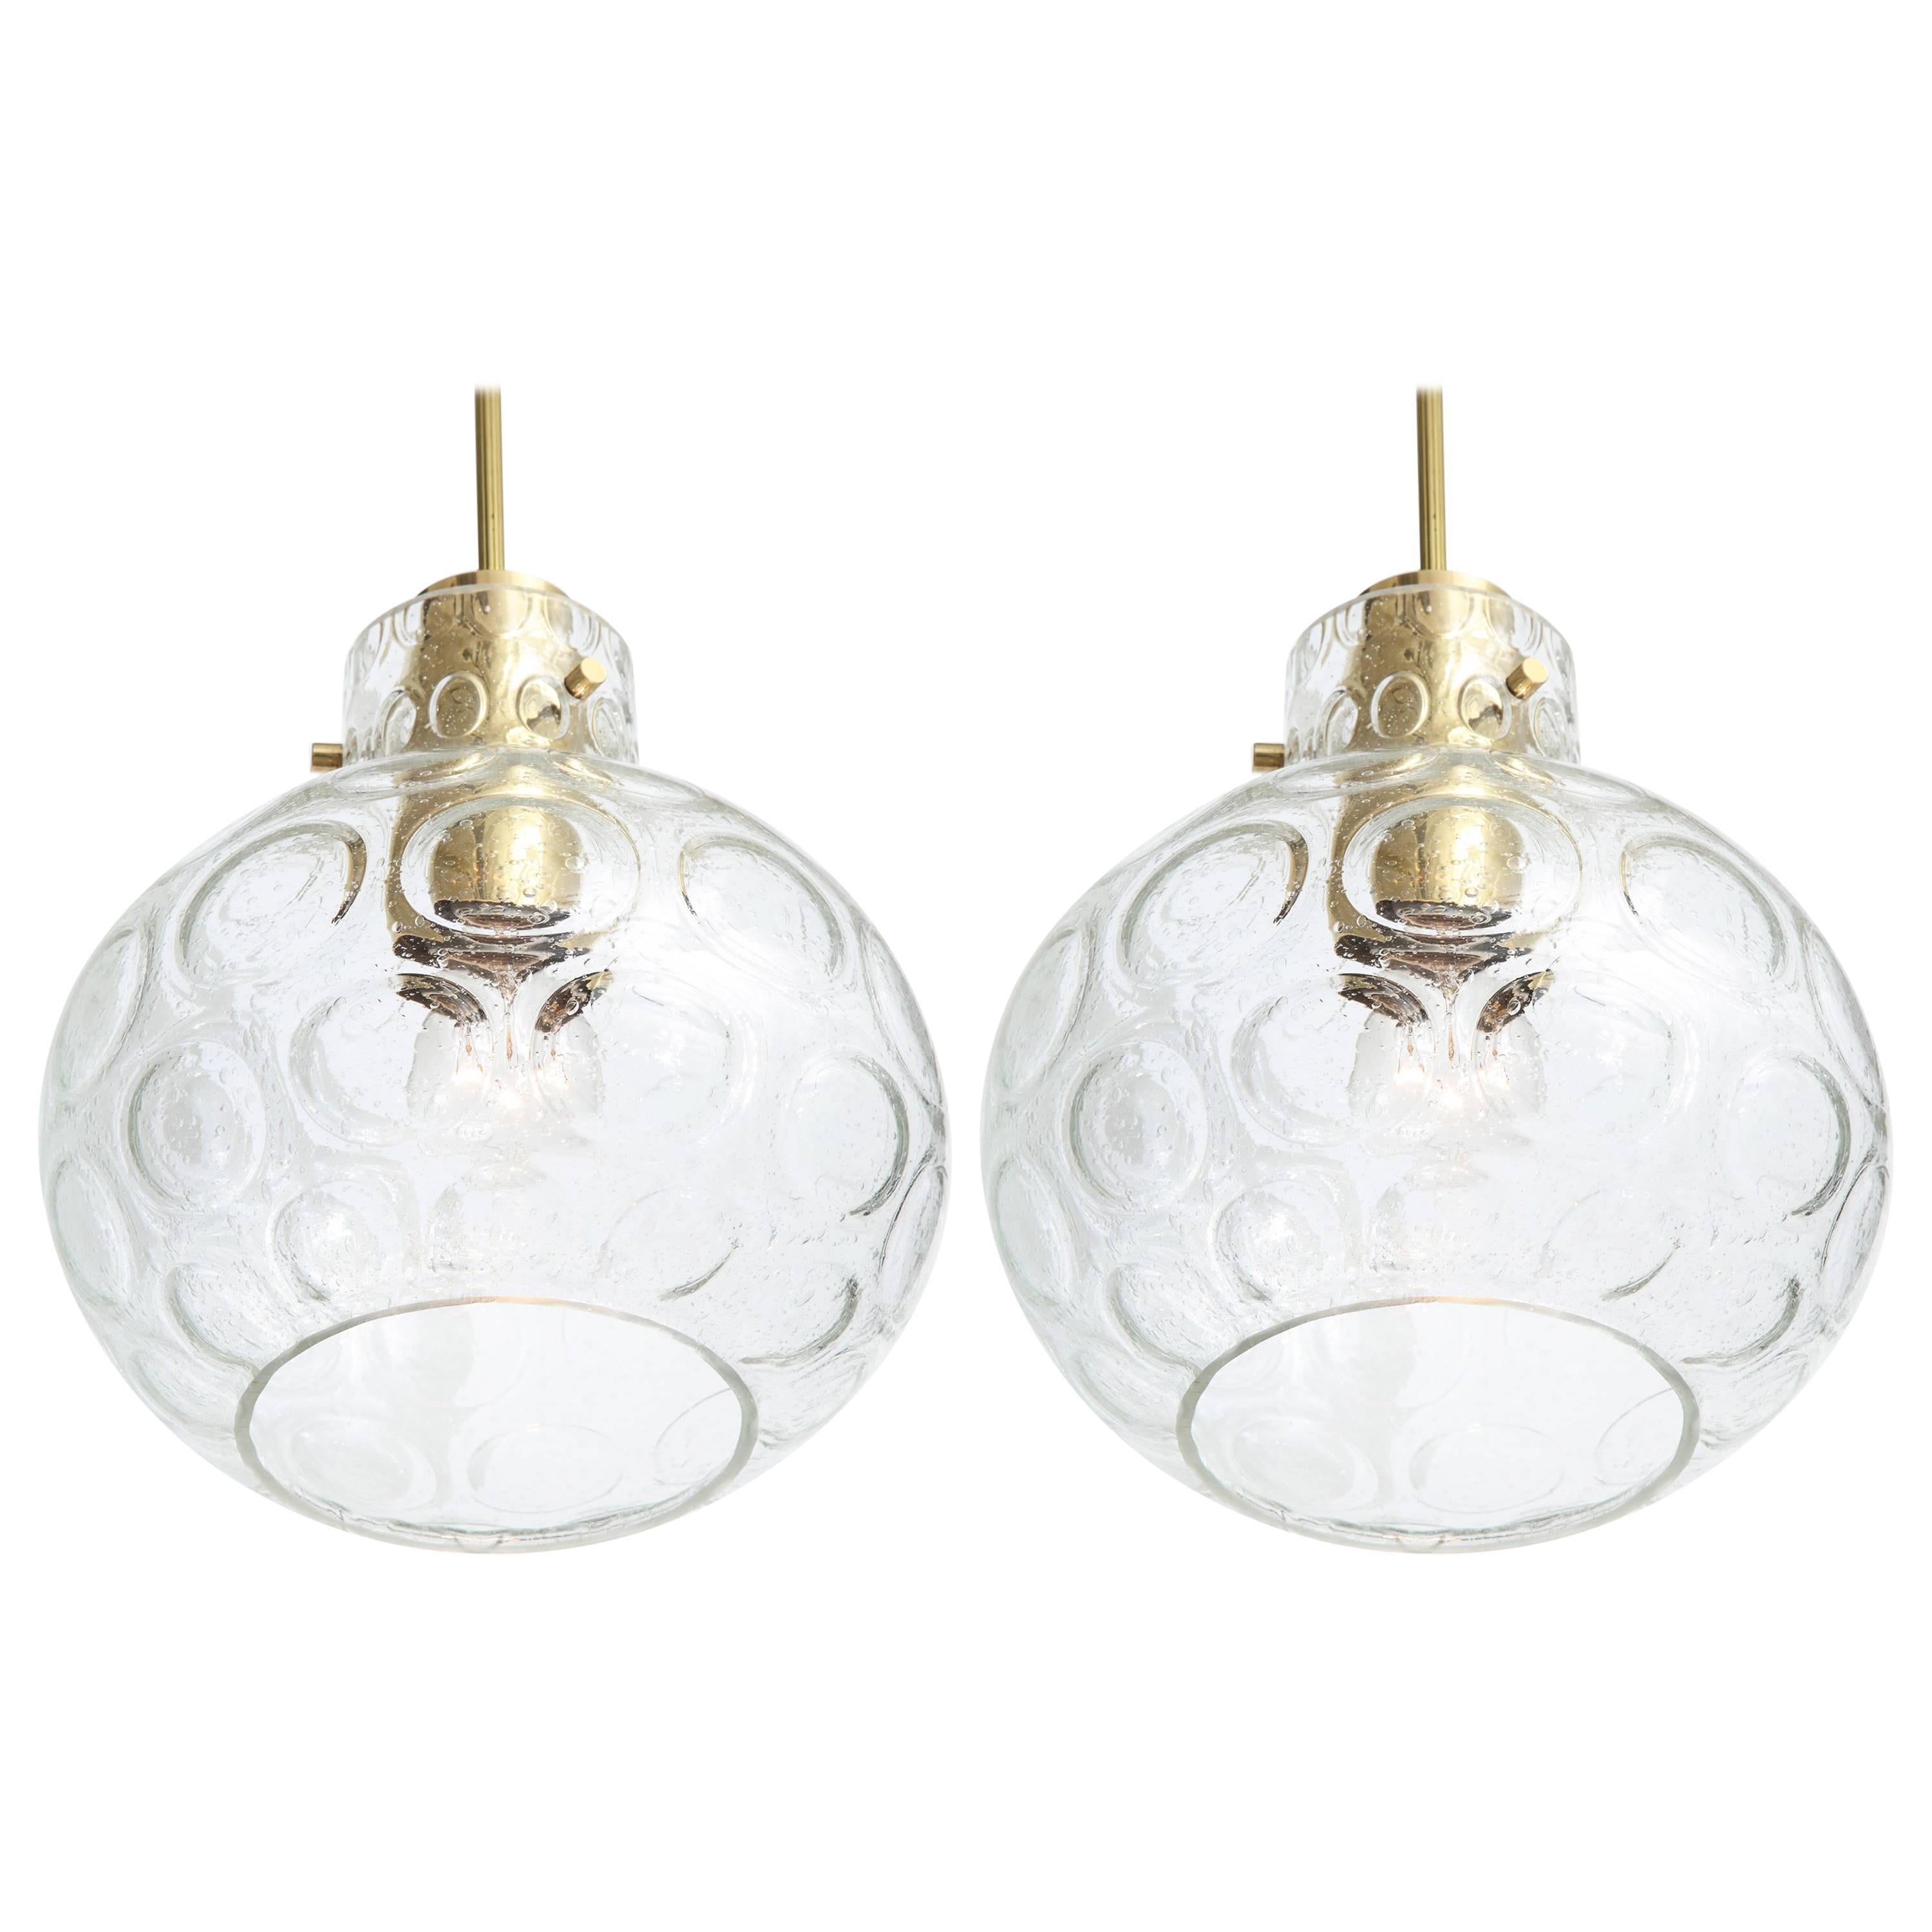 Pair of Pendant Lights by Doria (2 Pairs Available)